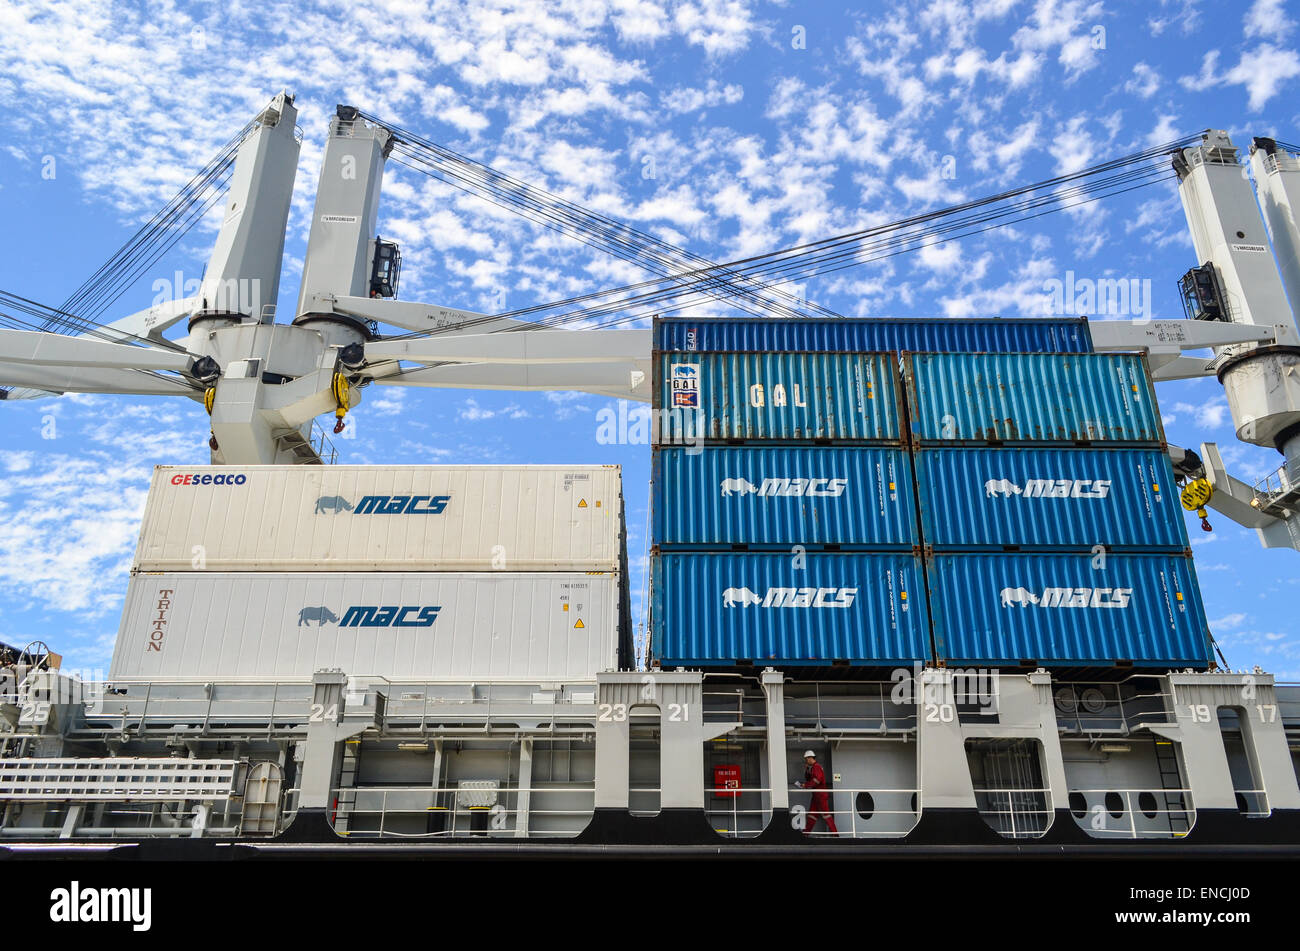 Containers on a multipurpose cargo vessel in the port of Cape Town, South Africa Stock Photo